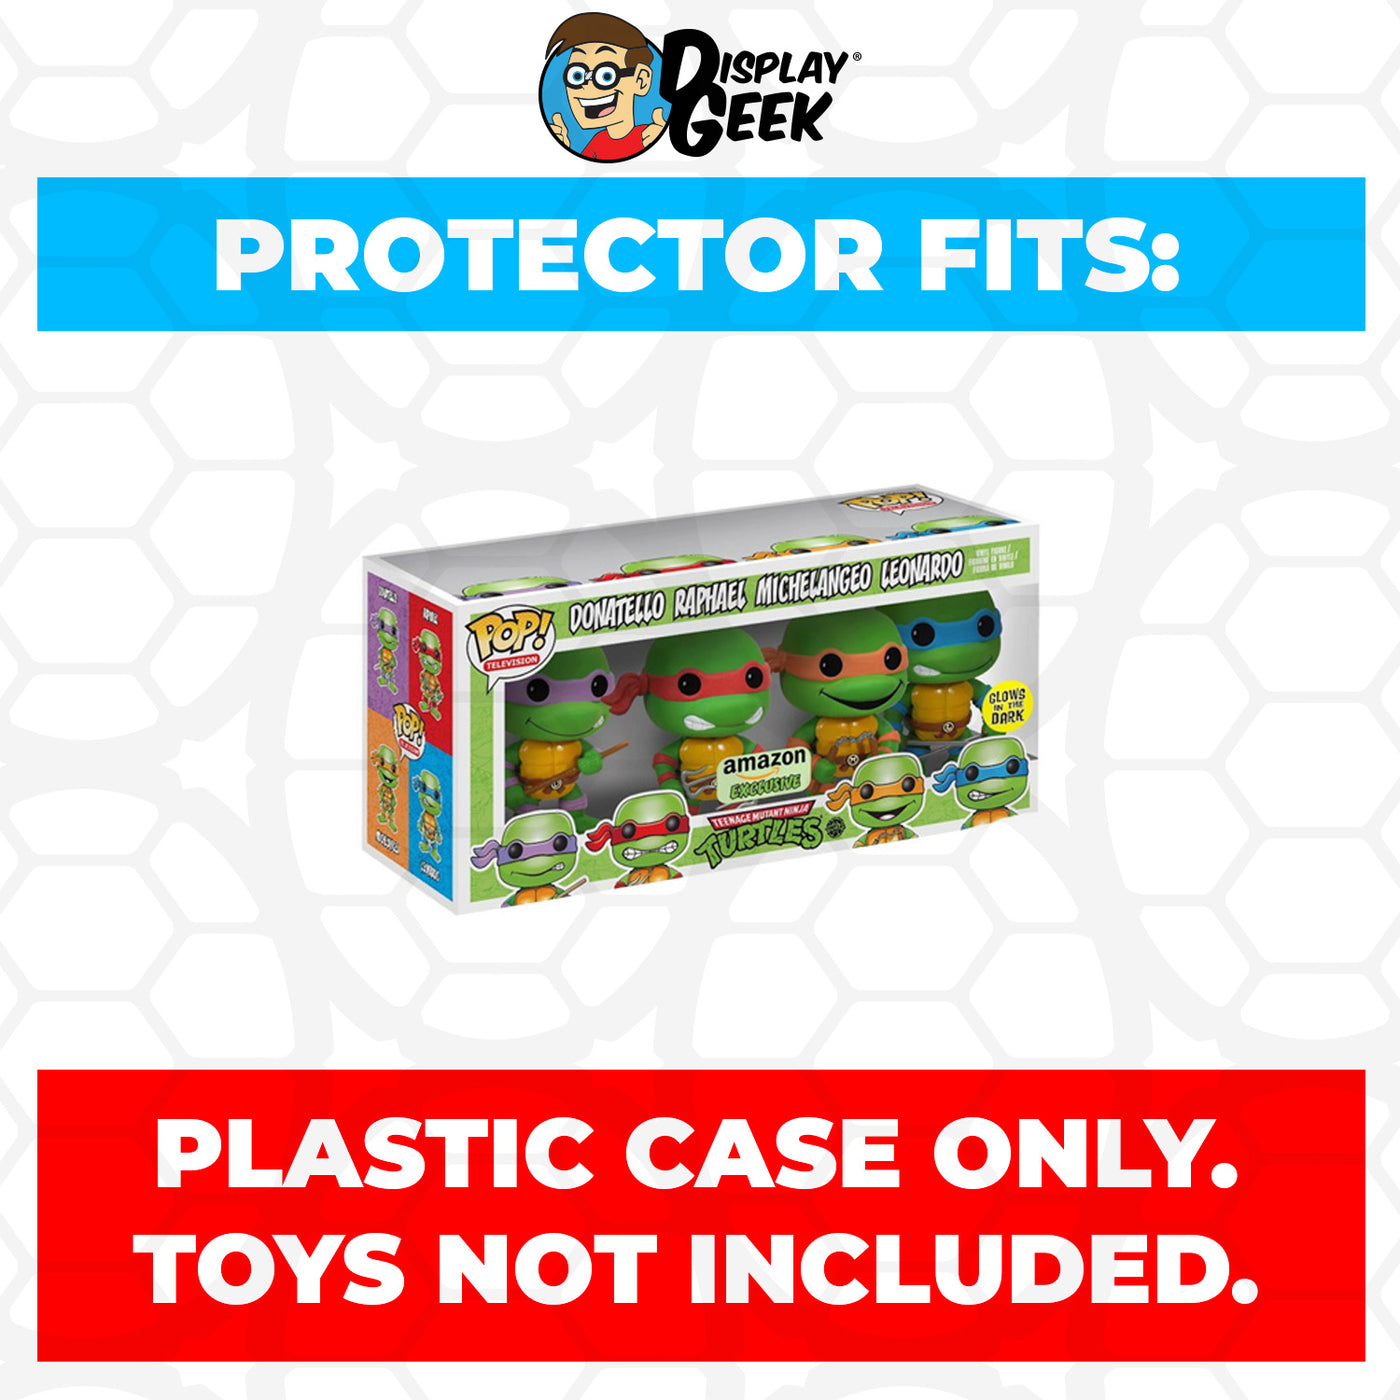 Pop Protector for 4 Pack TMNT Donatello, Raphael, Michelangelo & Leonardo Funko on The Protector Guide App by Display Geek